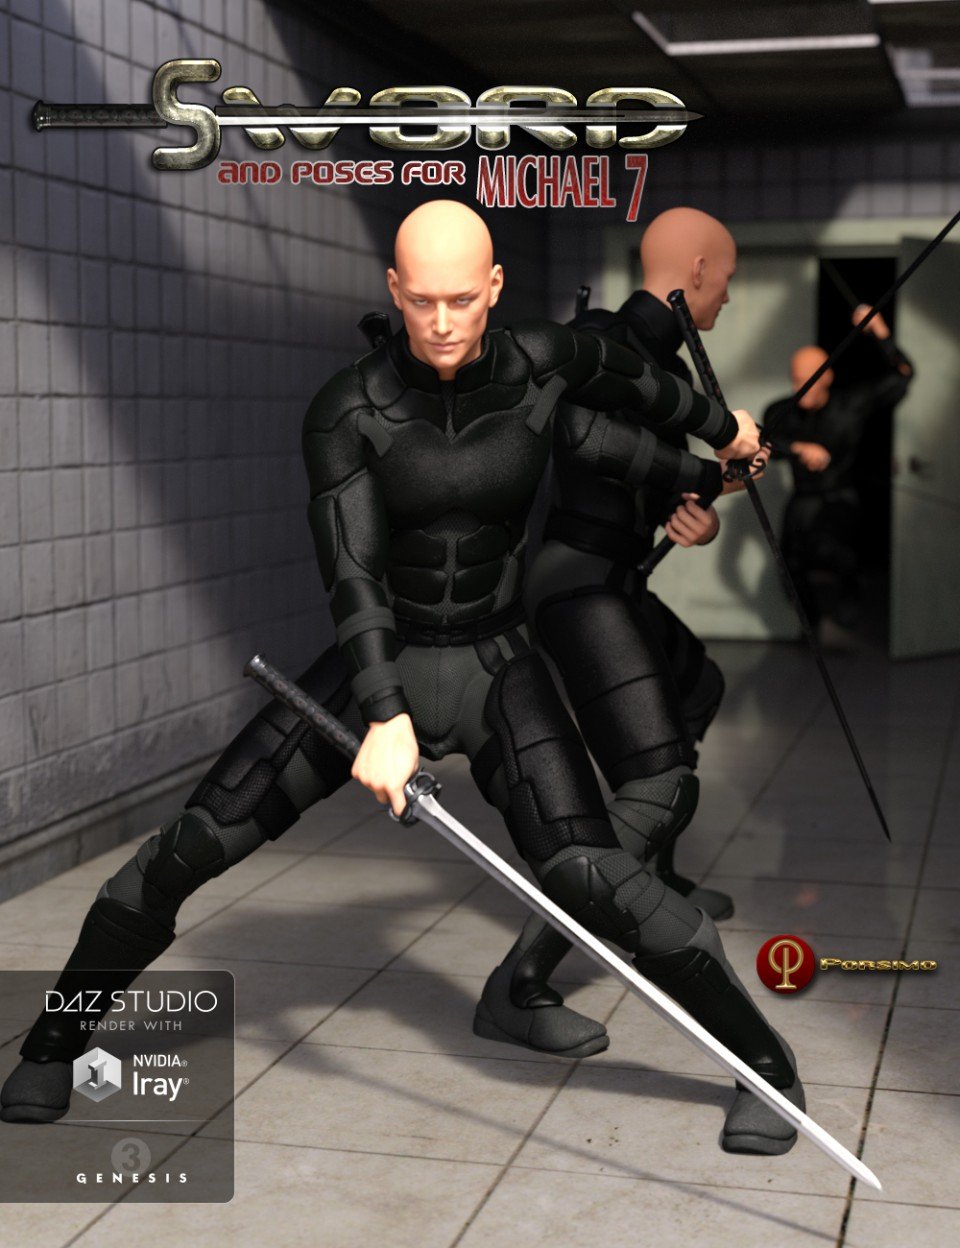 Sword and Poses for Michael 7_DAZ3DDL